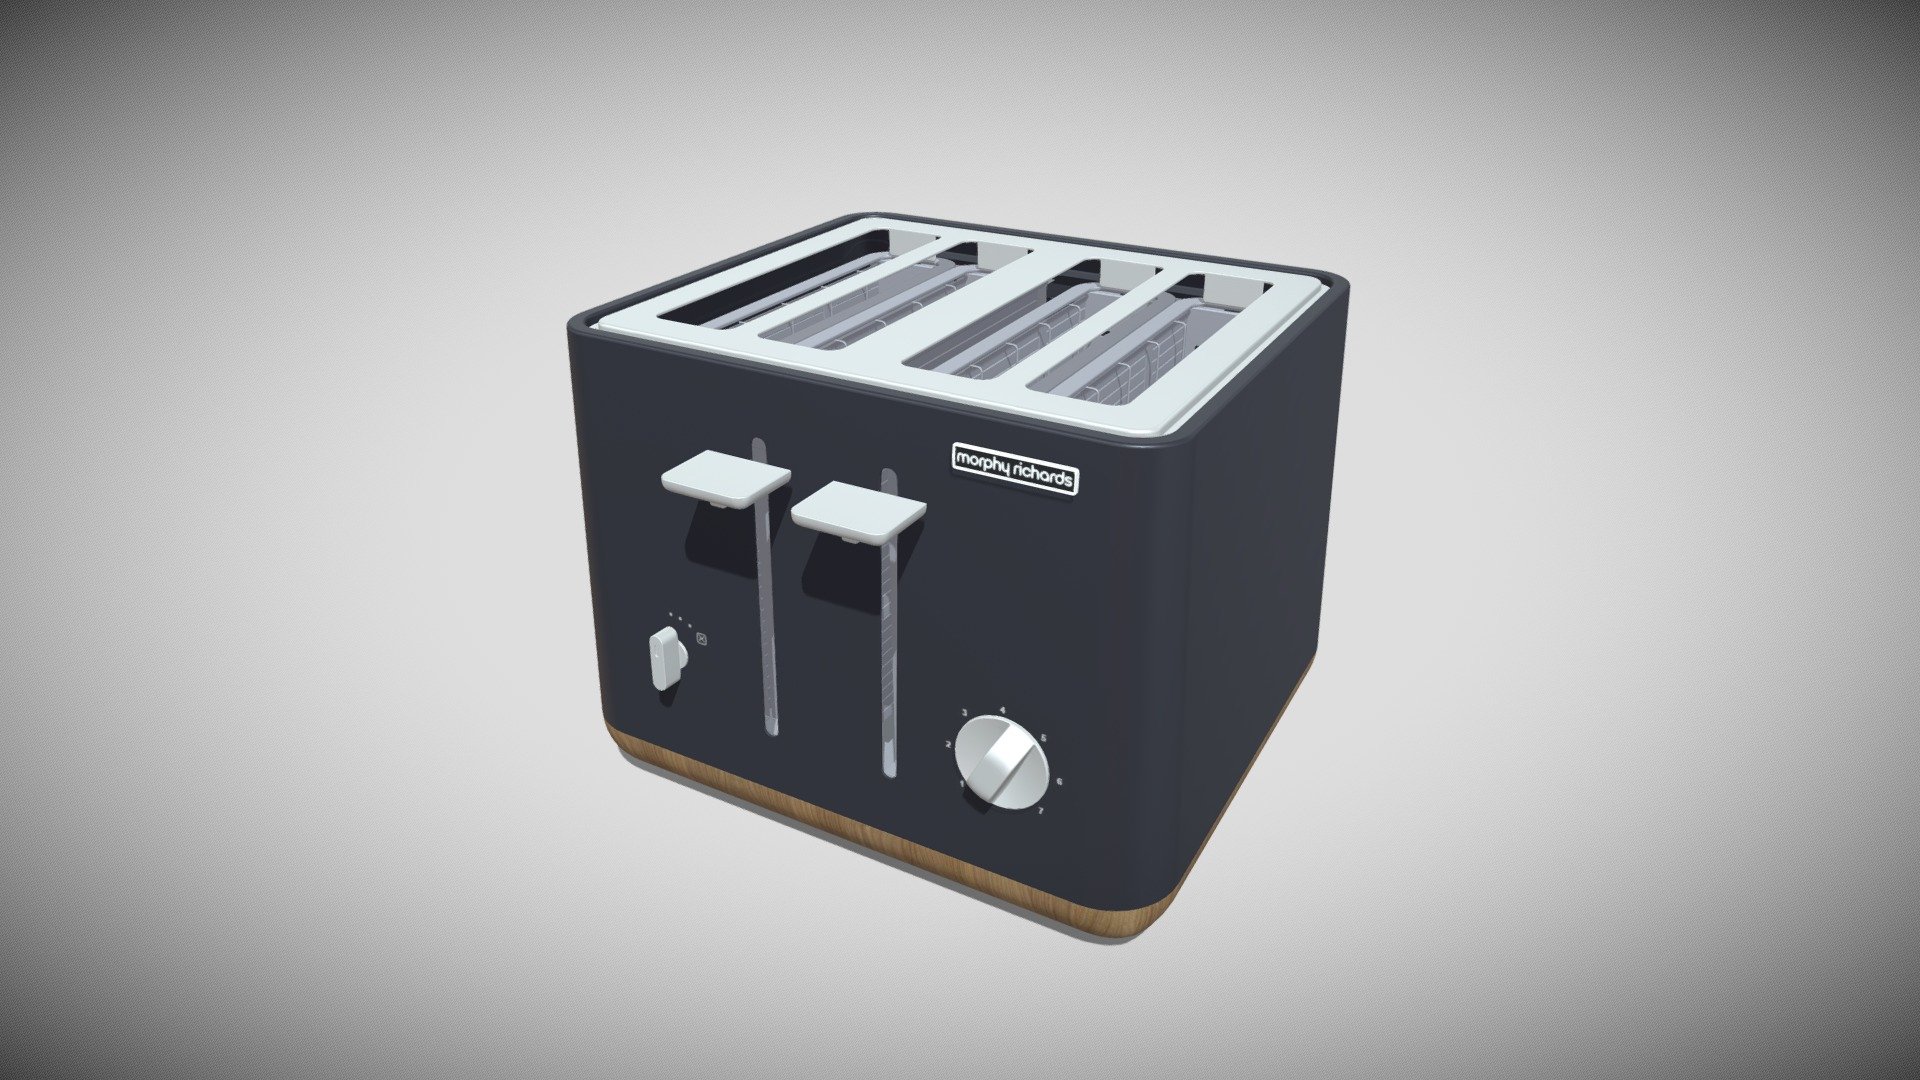 Detailed model of a Morphy Richards Aspect Scandi Toaster, modeled in Cinema 4D.The model was created using approximate real world dimensions.

The model has 94,712 polys and 92,732 vertices.

An additional file has been provided containing the original Cinema 4D project file, textures and other 3d export files such as 3ds, fbx and obj 3d model